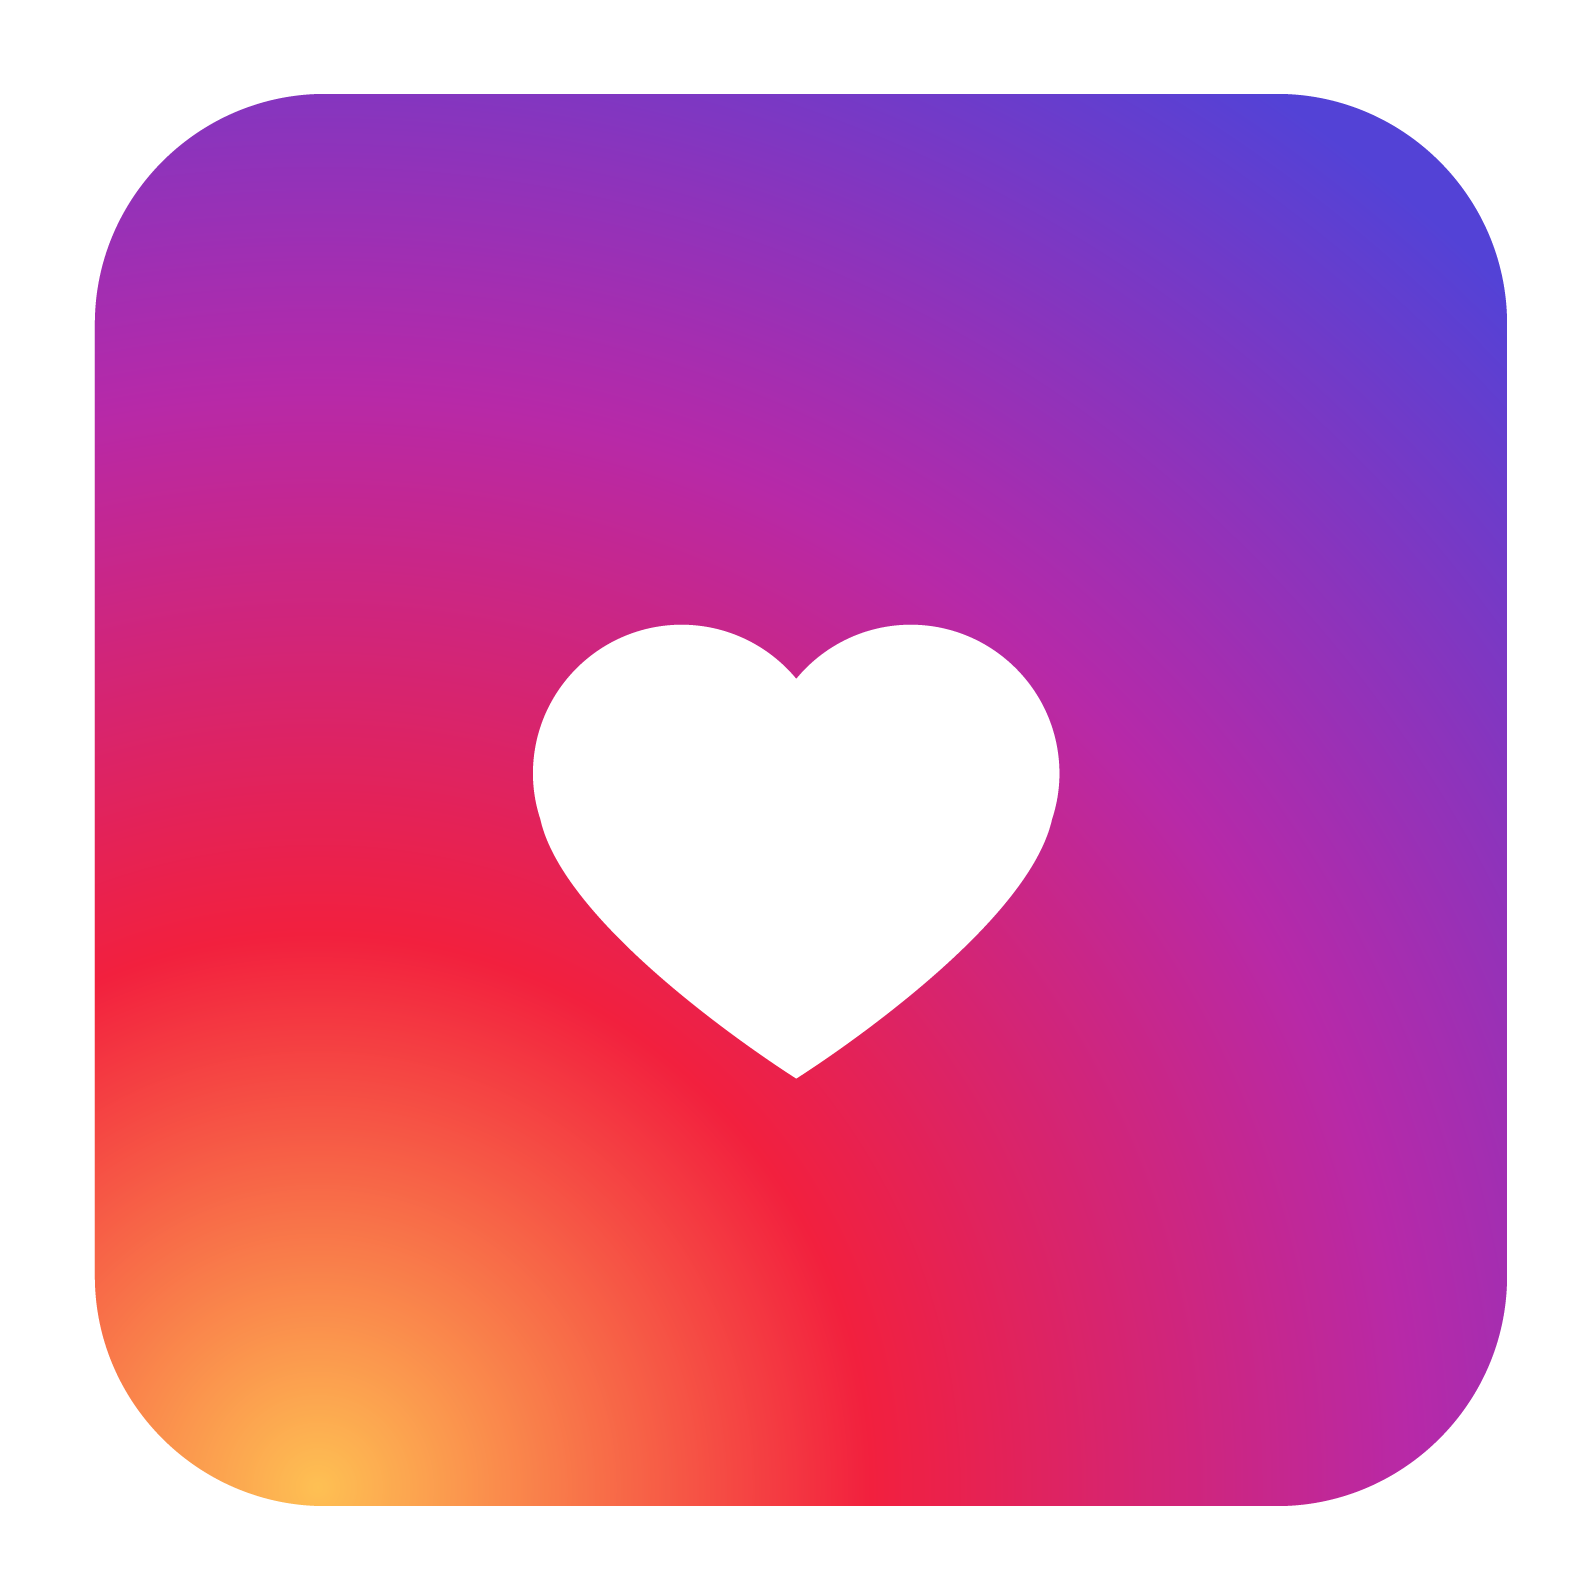 Instagram Heart Icon PNG Picture pngteam.com